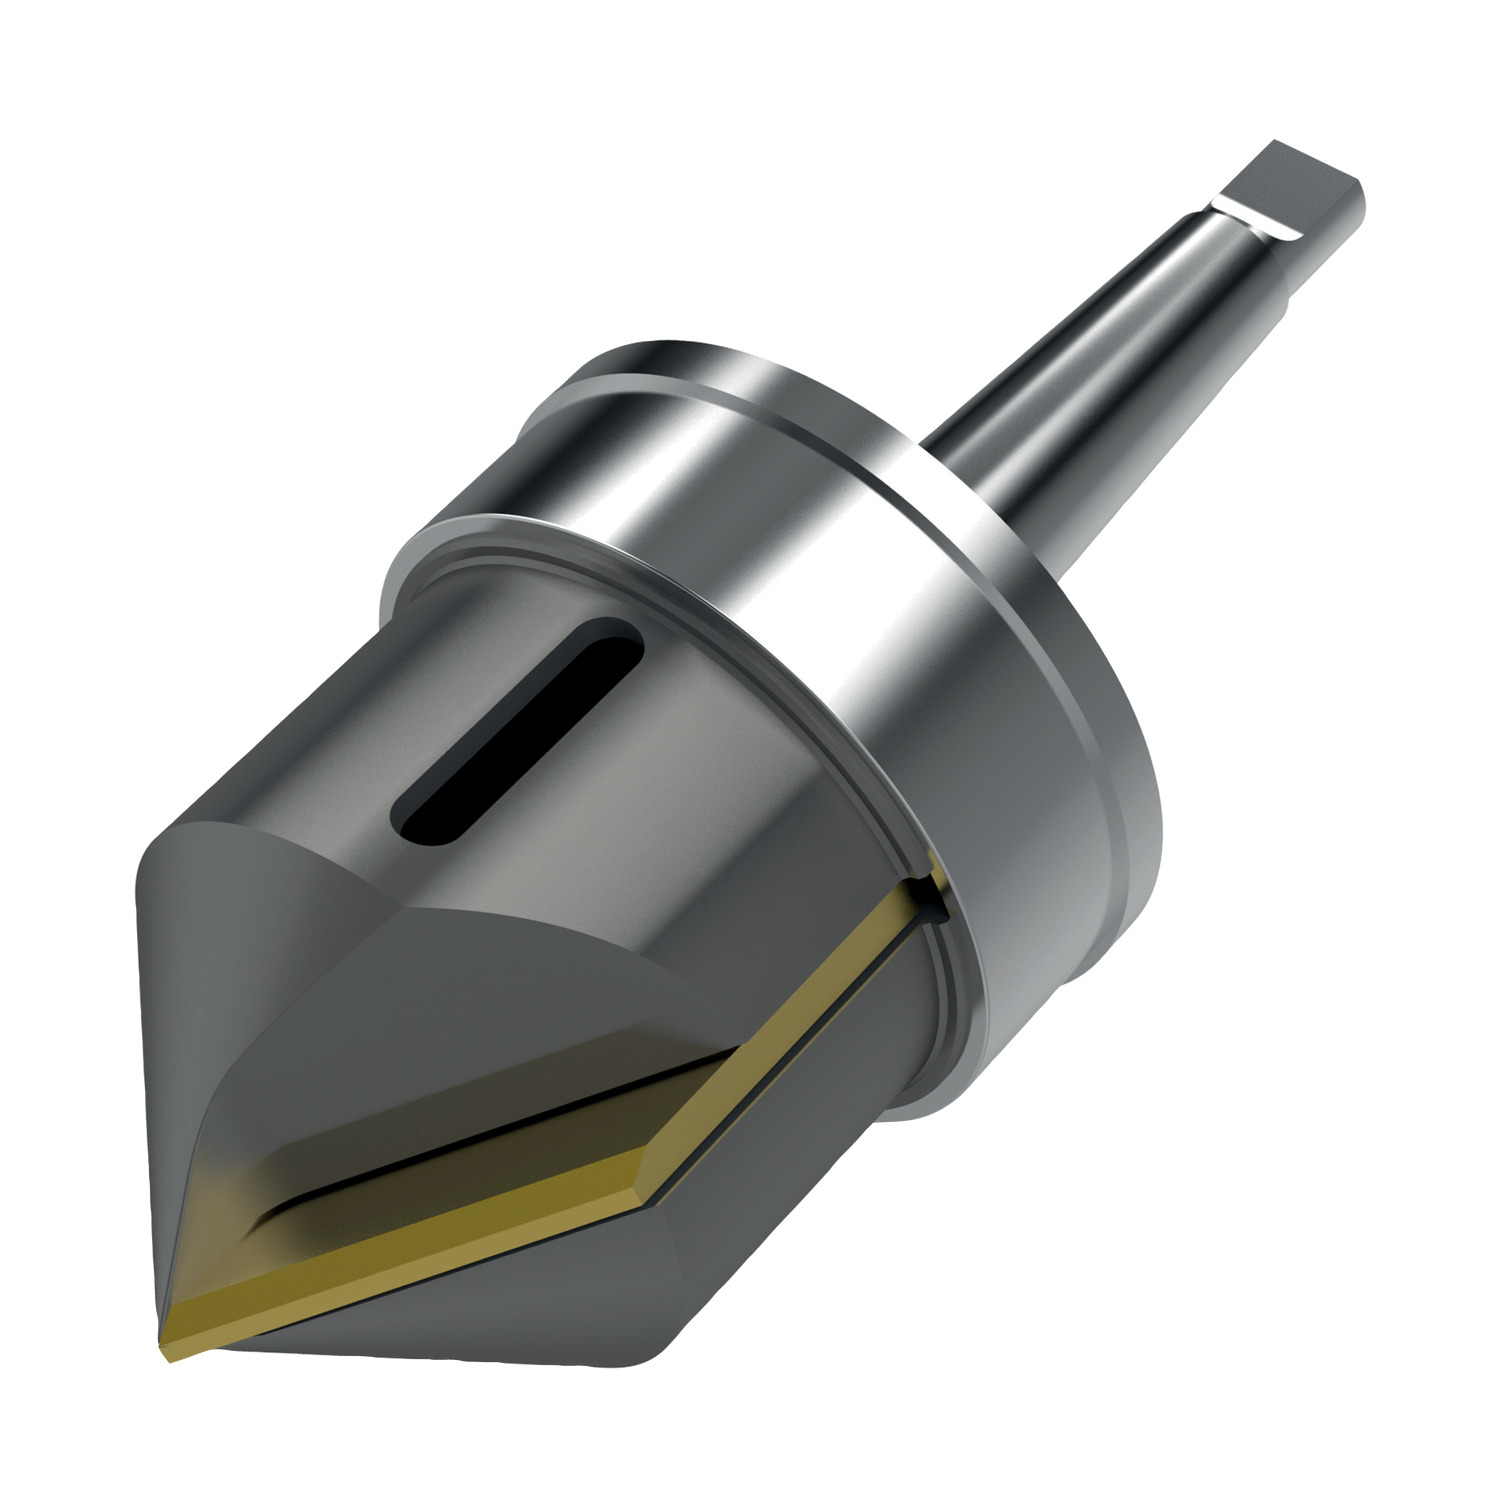 Inner Chamfering Tools Our kopal inner chamfering tools achieve high quality concentric chamfering quickly and easily without risk of damage/cutting into workpiece.